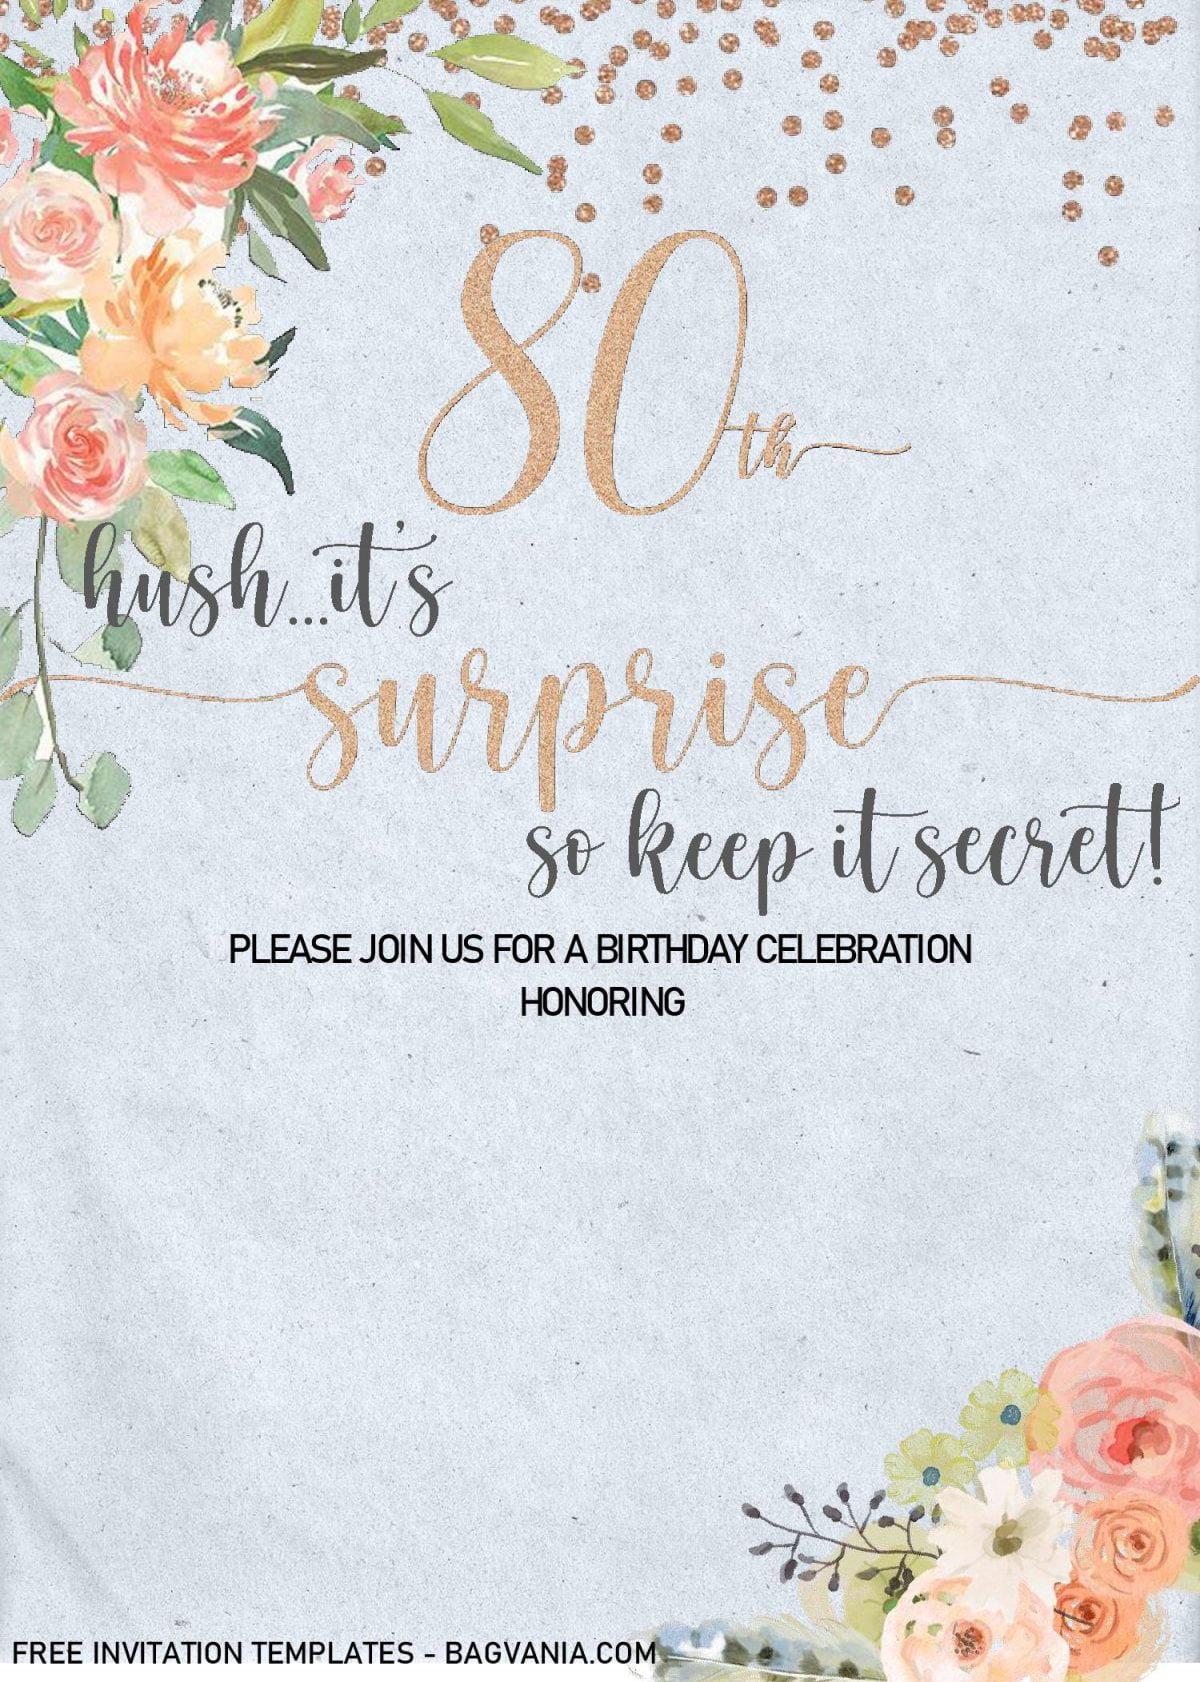 Floral 80th Birthday Invitation Templates - Editable With MS Word and has gold fonts